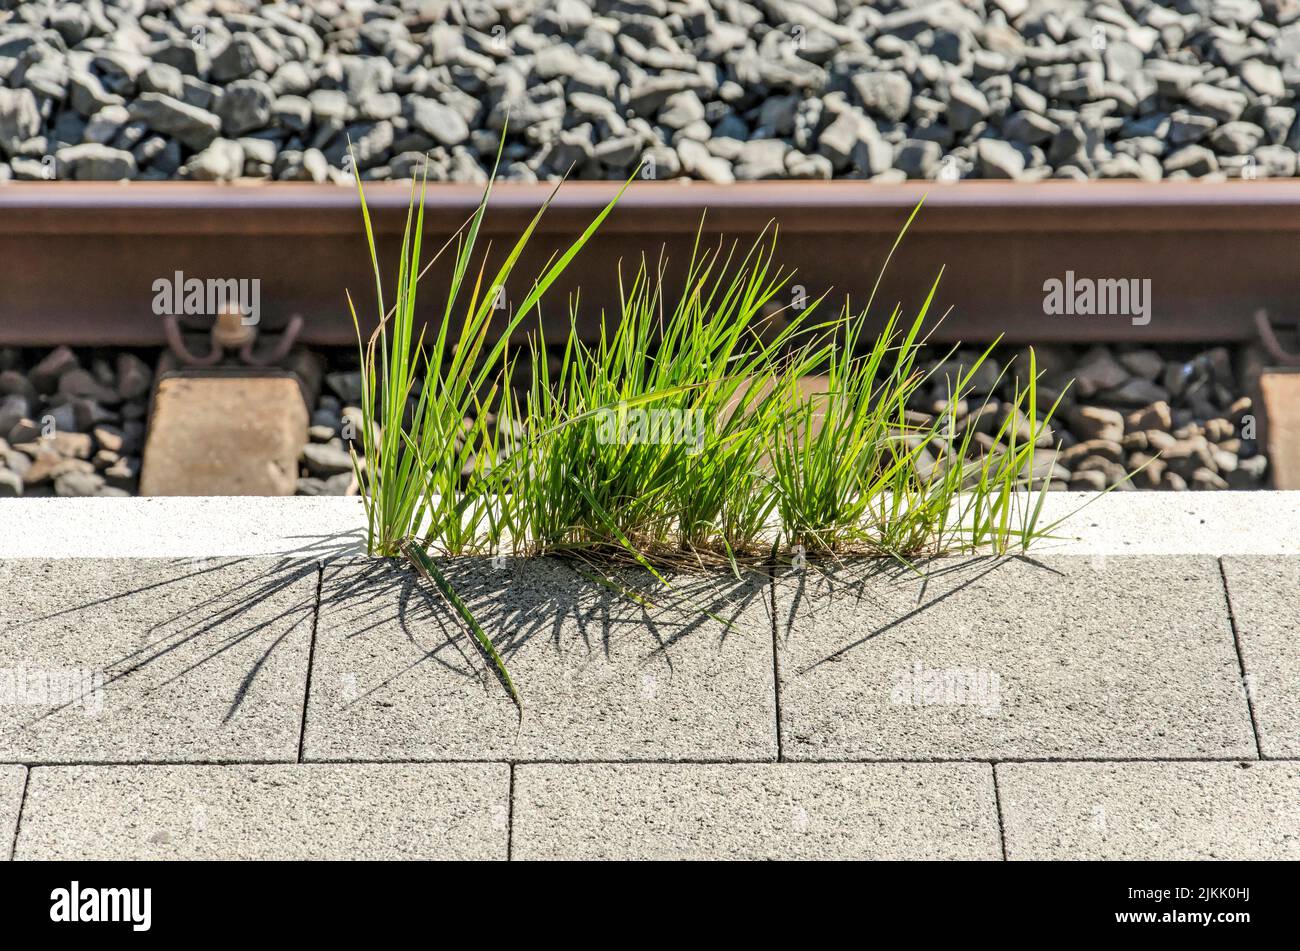 Clumps of grass growing on the edge of a railway platform in Utrecht, The Netherlands Stock Photo